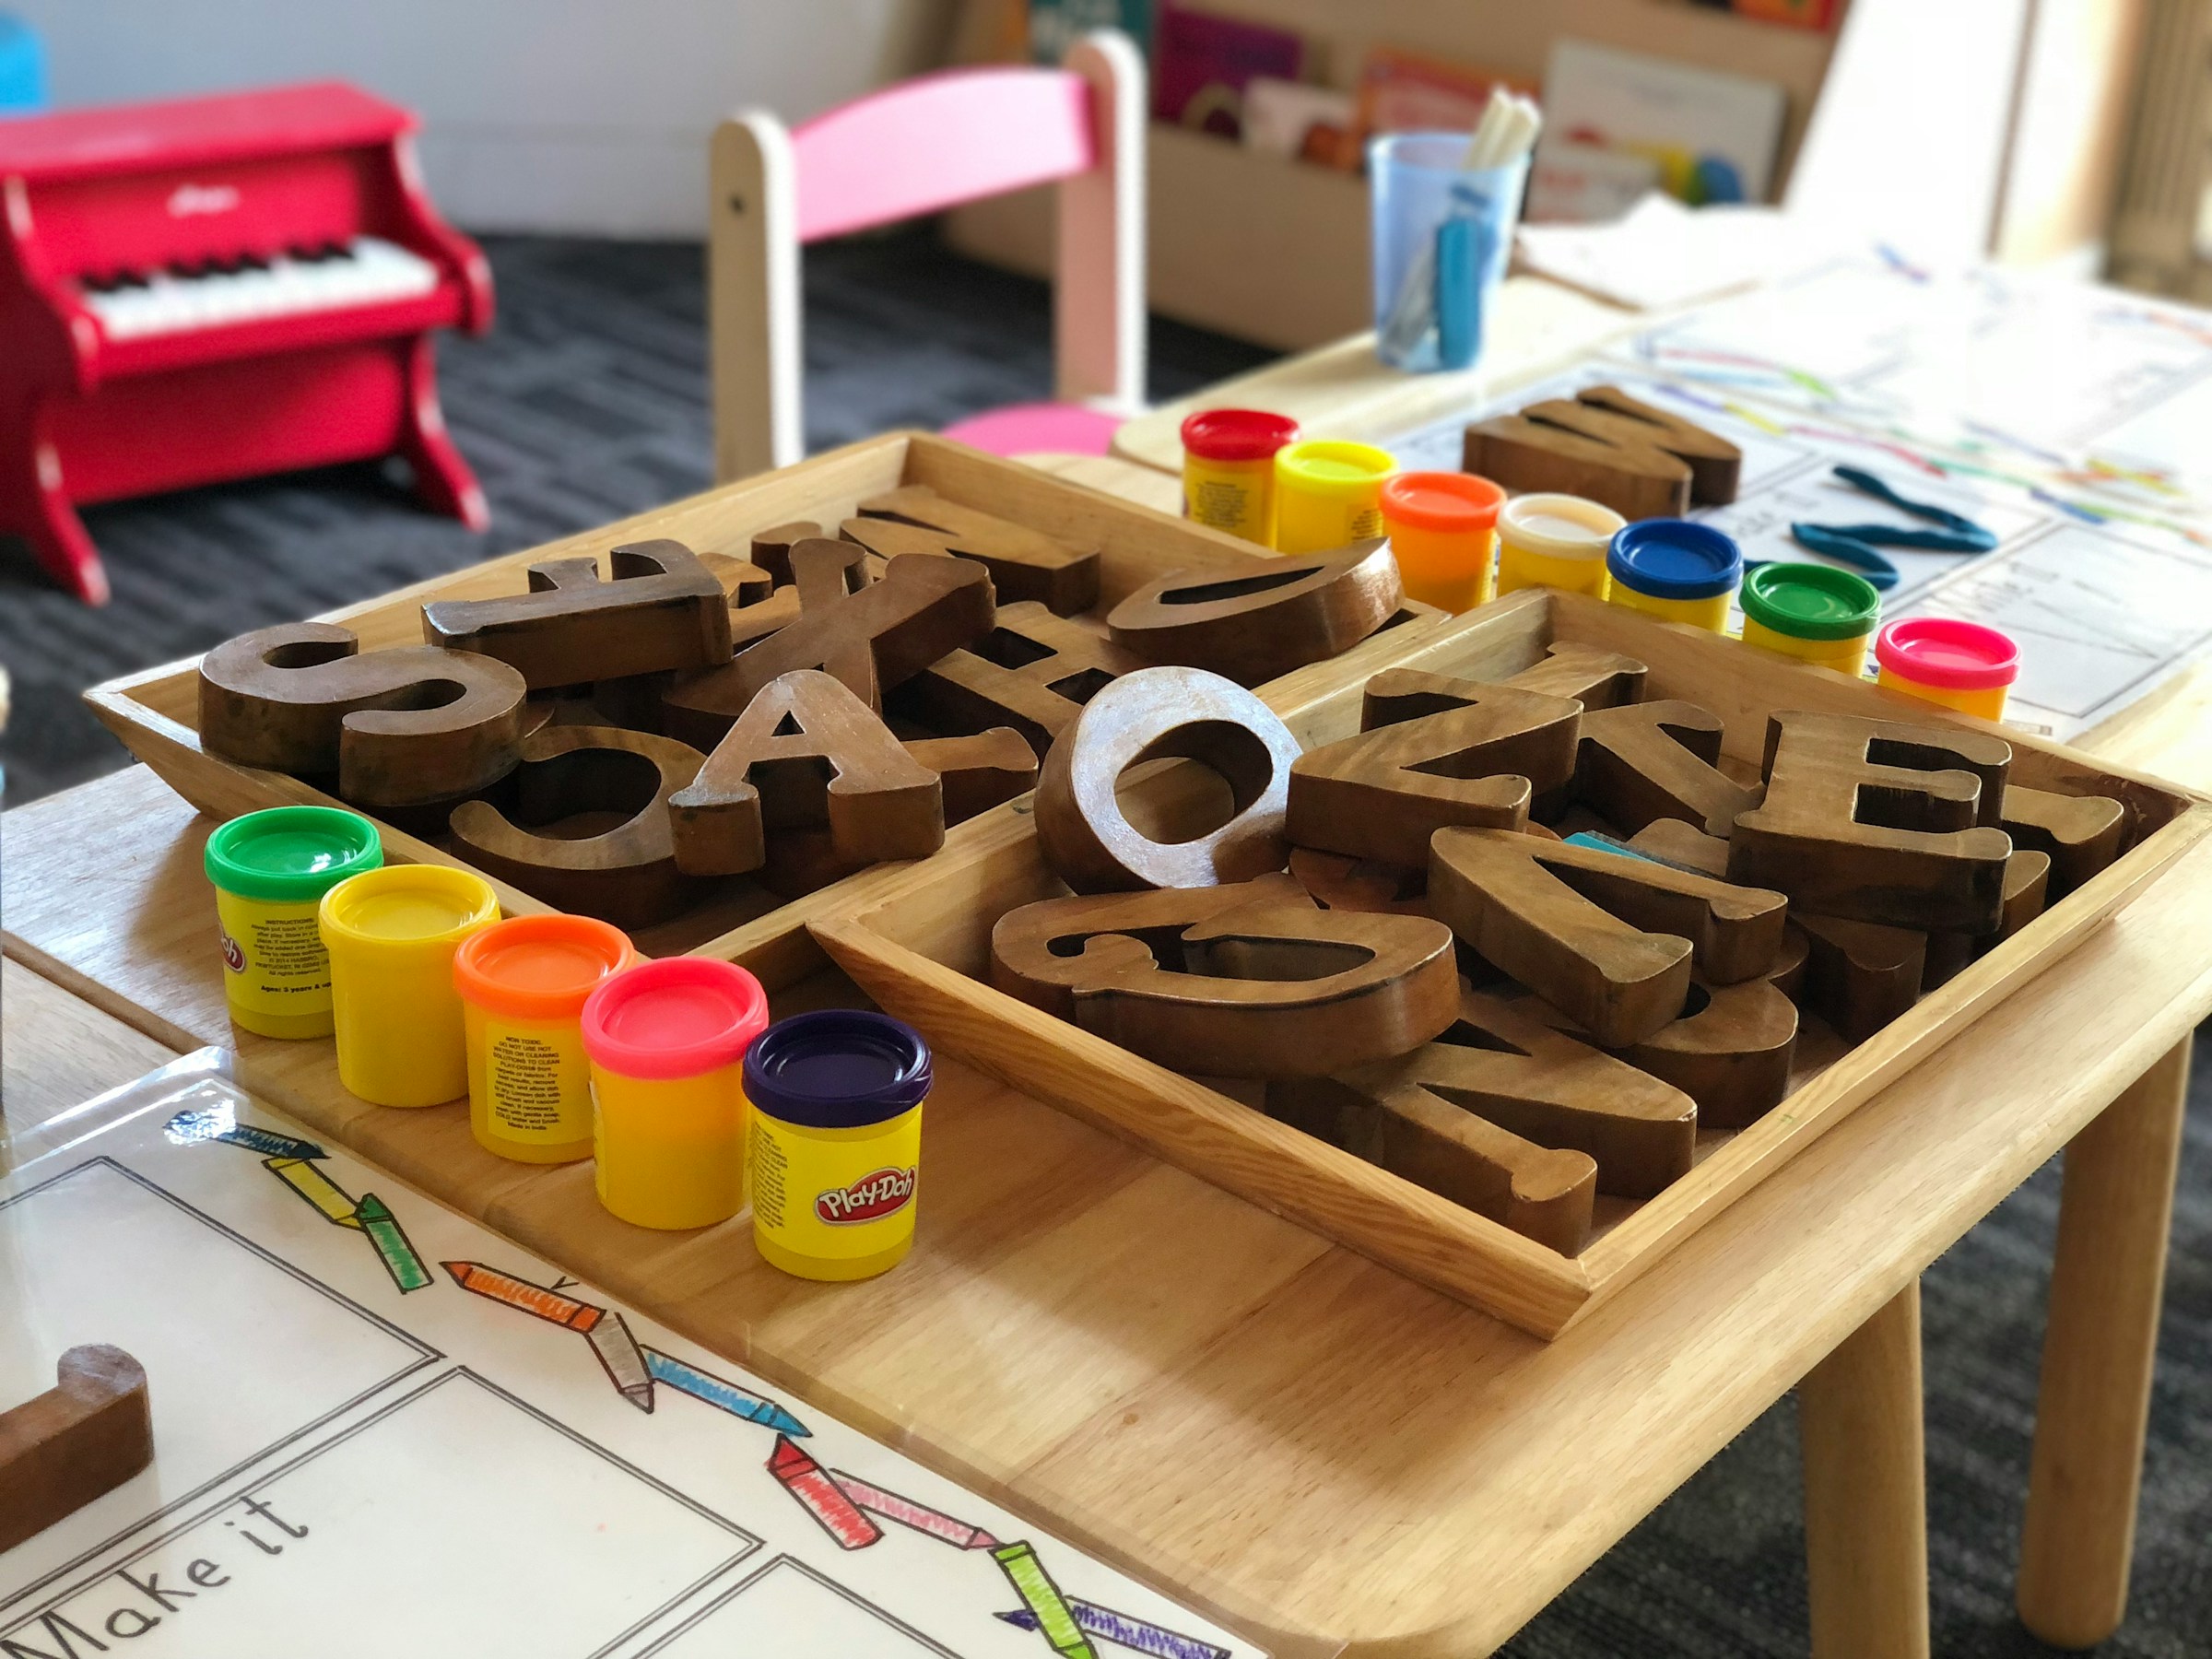 A table at a daycare facility | Source: Unsplash